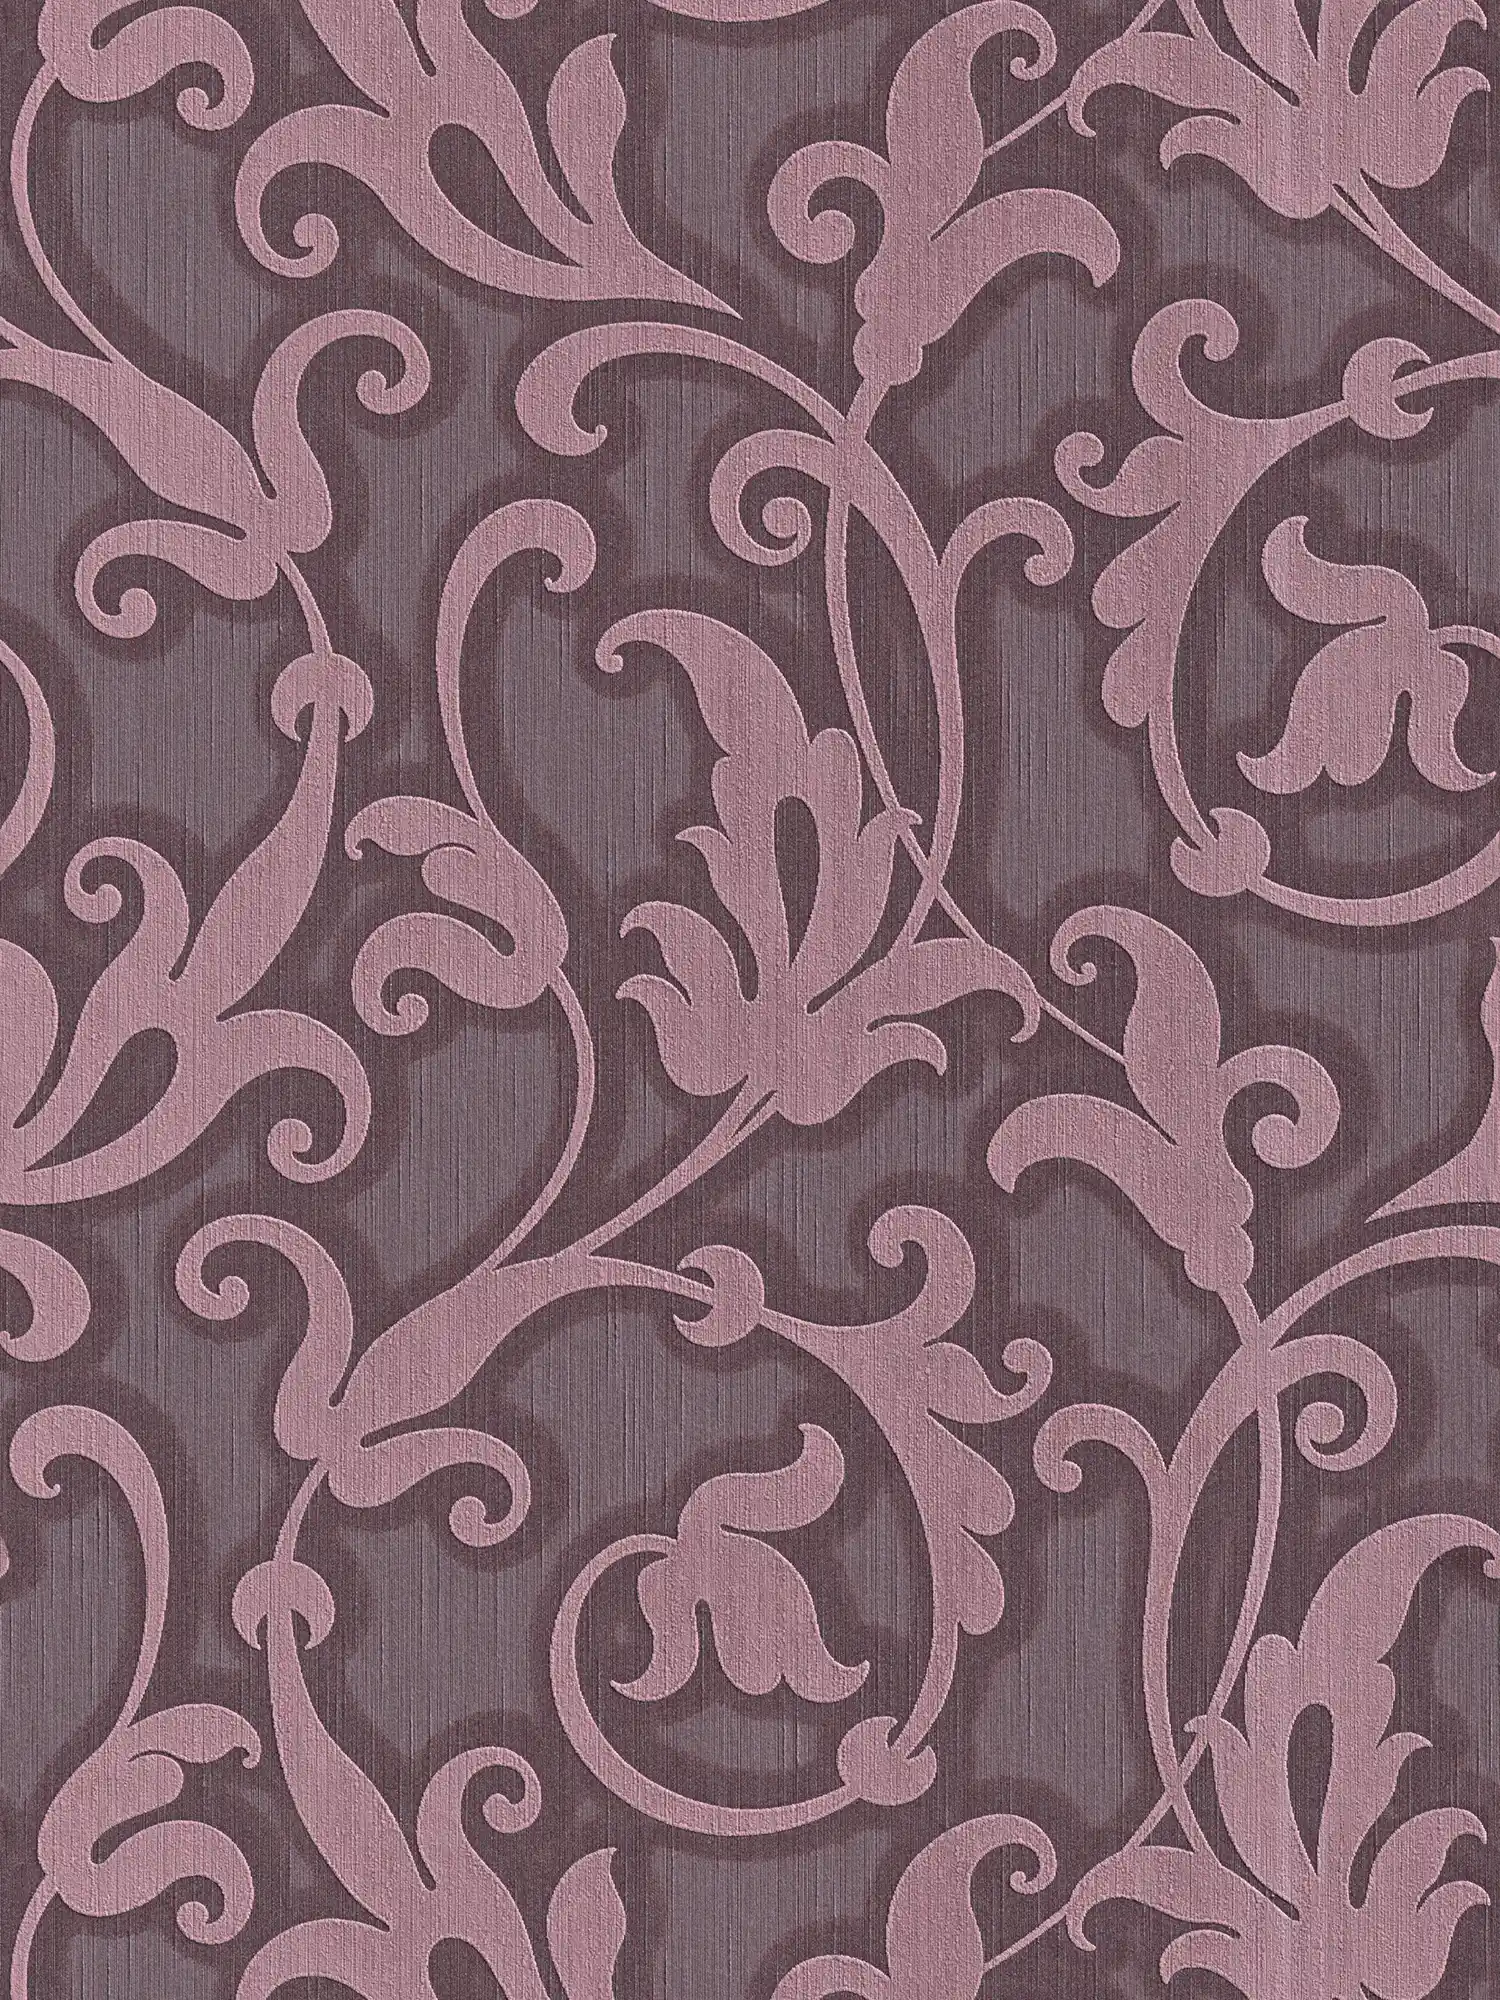 Baroque wallpaper with textile structure & embossed pattern - purple, metallic
